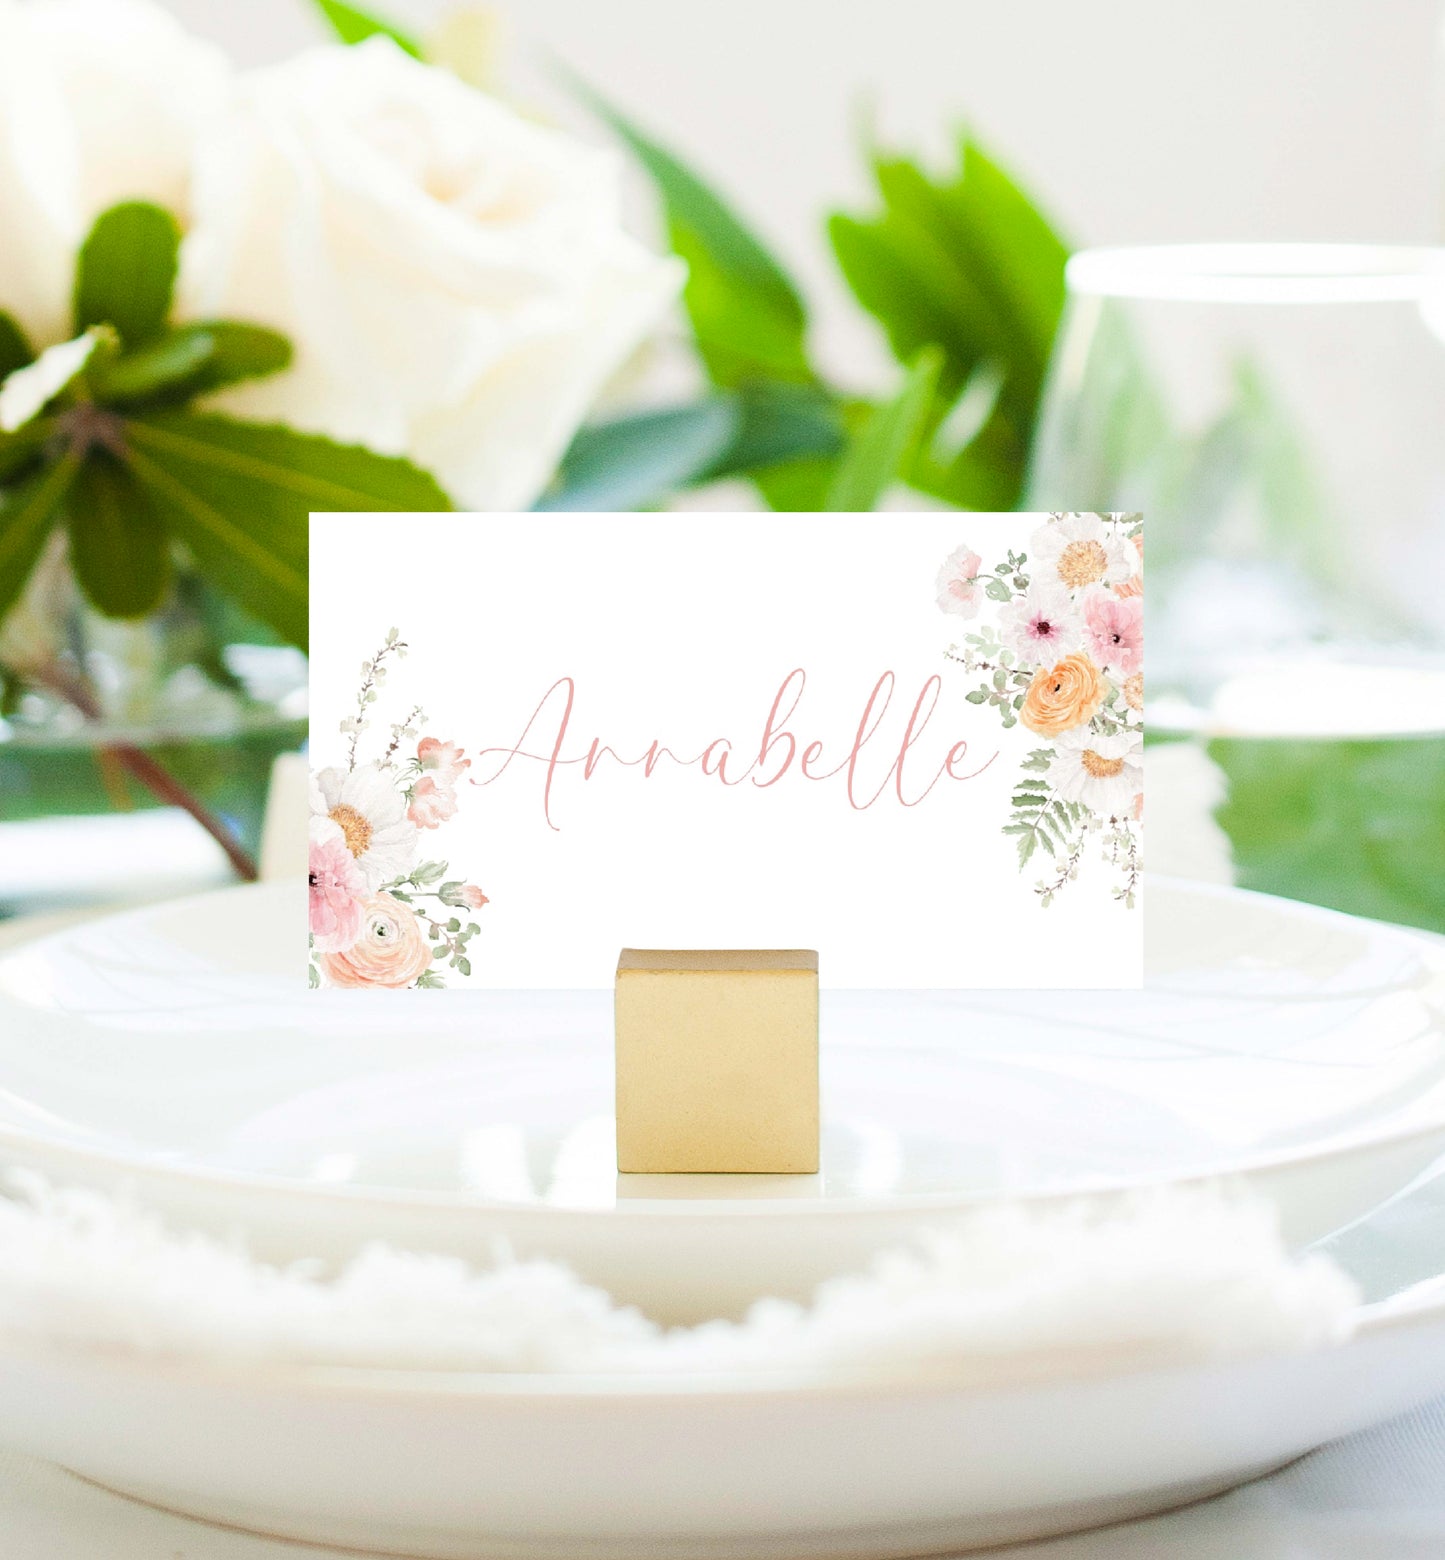 Printable Place Card Template, Spring Wildflower, Bridal Shower Place Cards, Baby Shower Place Cards, Editable Wedding Place Cards, Millie